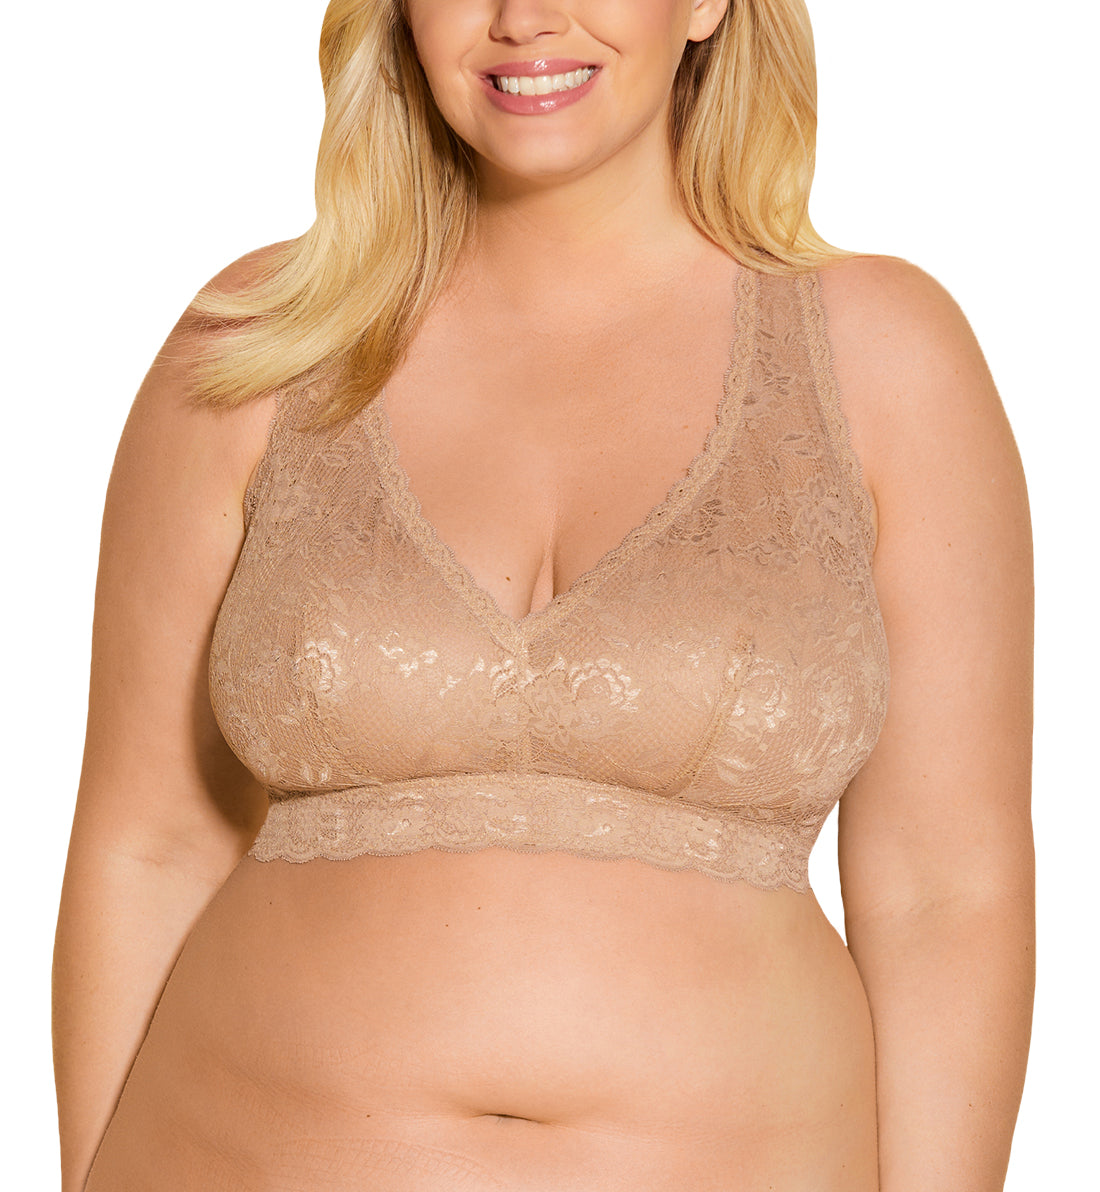 Cosabella Never Say Never ULTRA CURVY Racie Racerback Bralette (NEVER1353),XS,India - India,XS